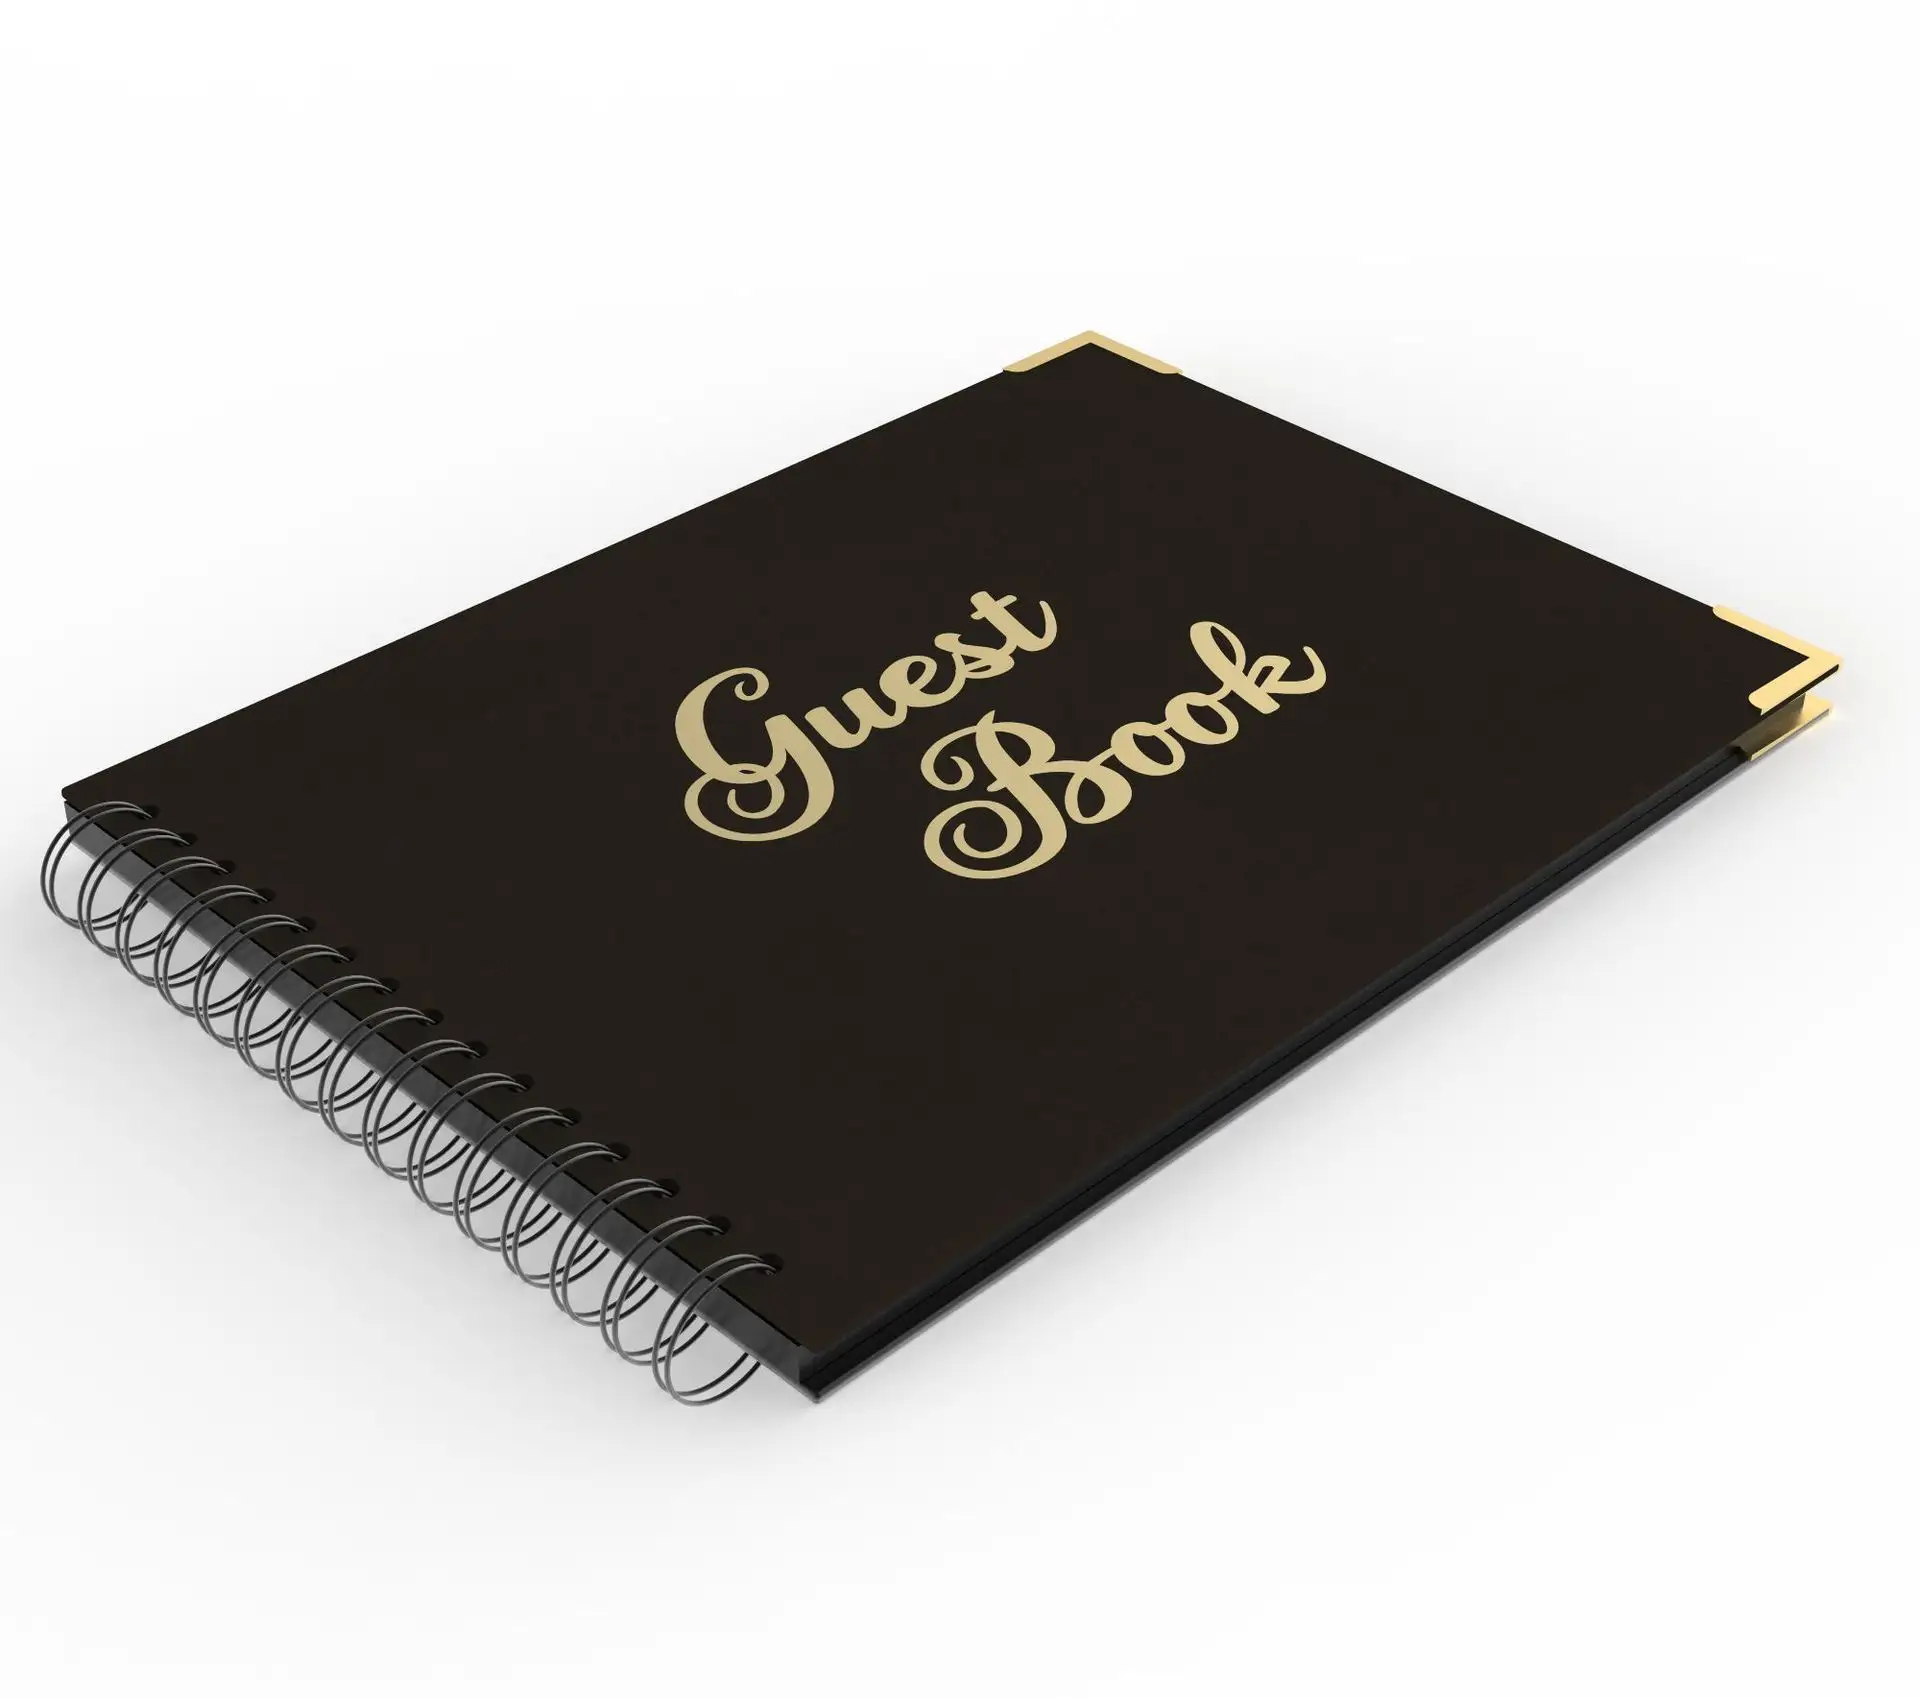 Wholesale Creative Guest Sign-in book Pasted Photo Black Card Spiral 82 pages Book Fine mounted hard cover with Ribbon Guestbook